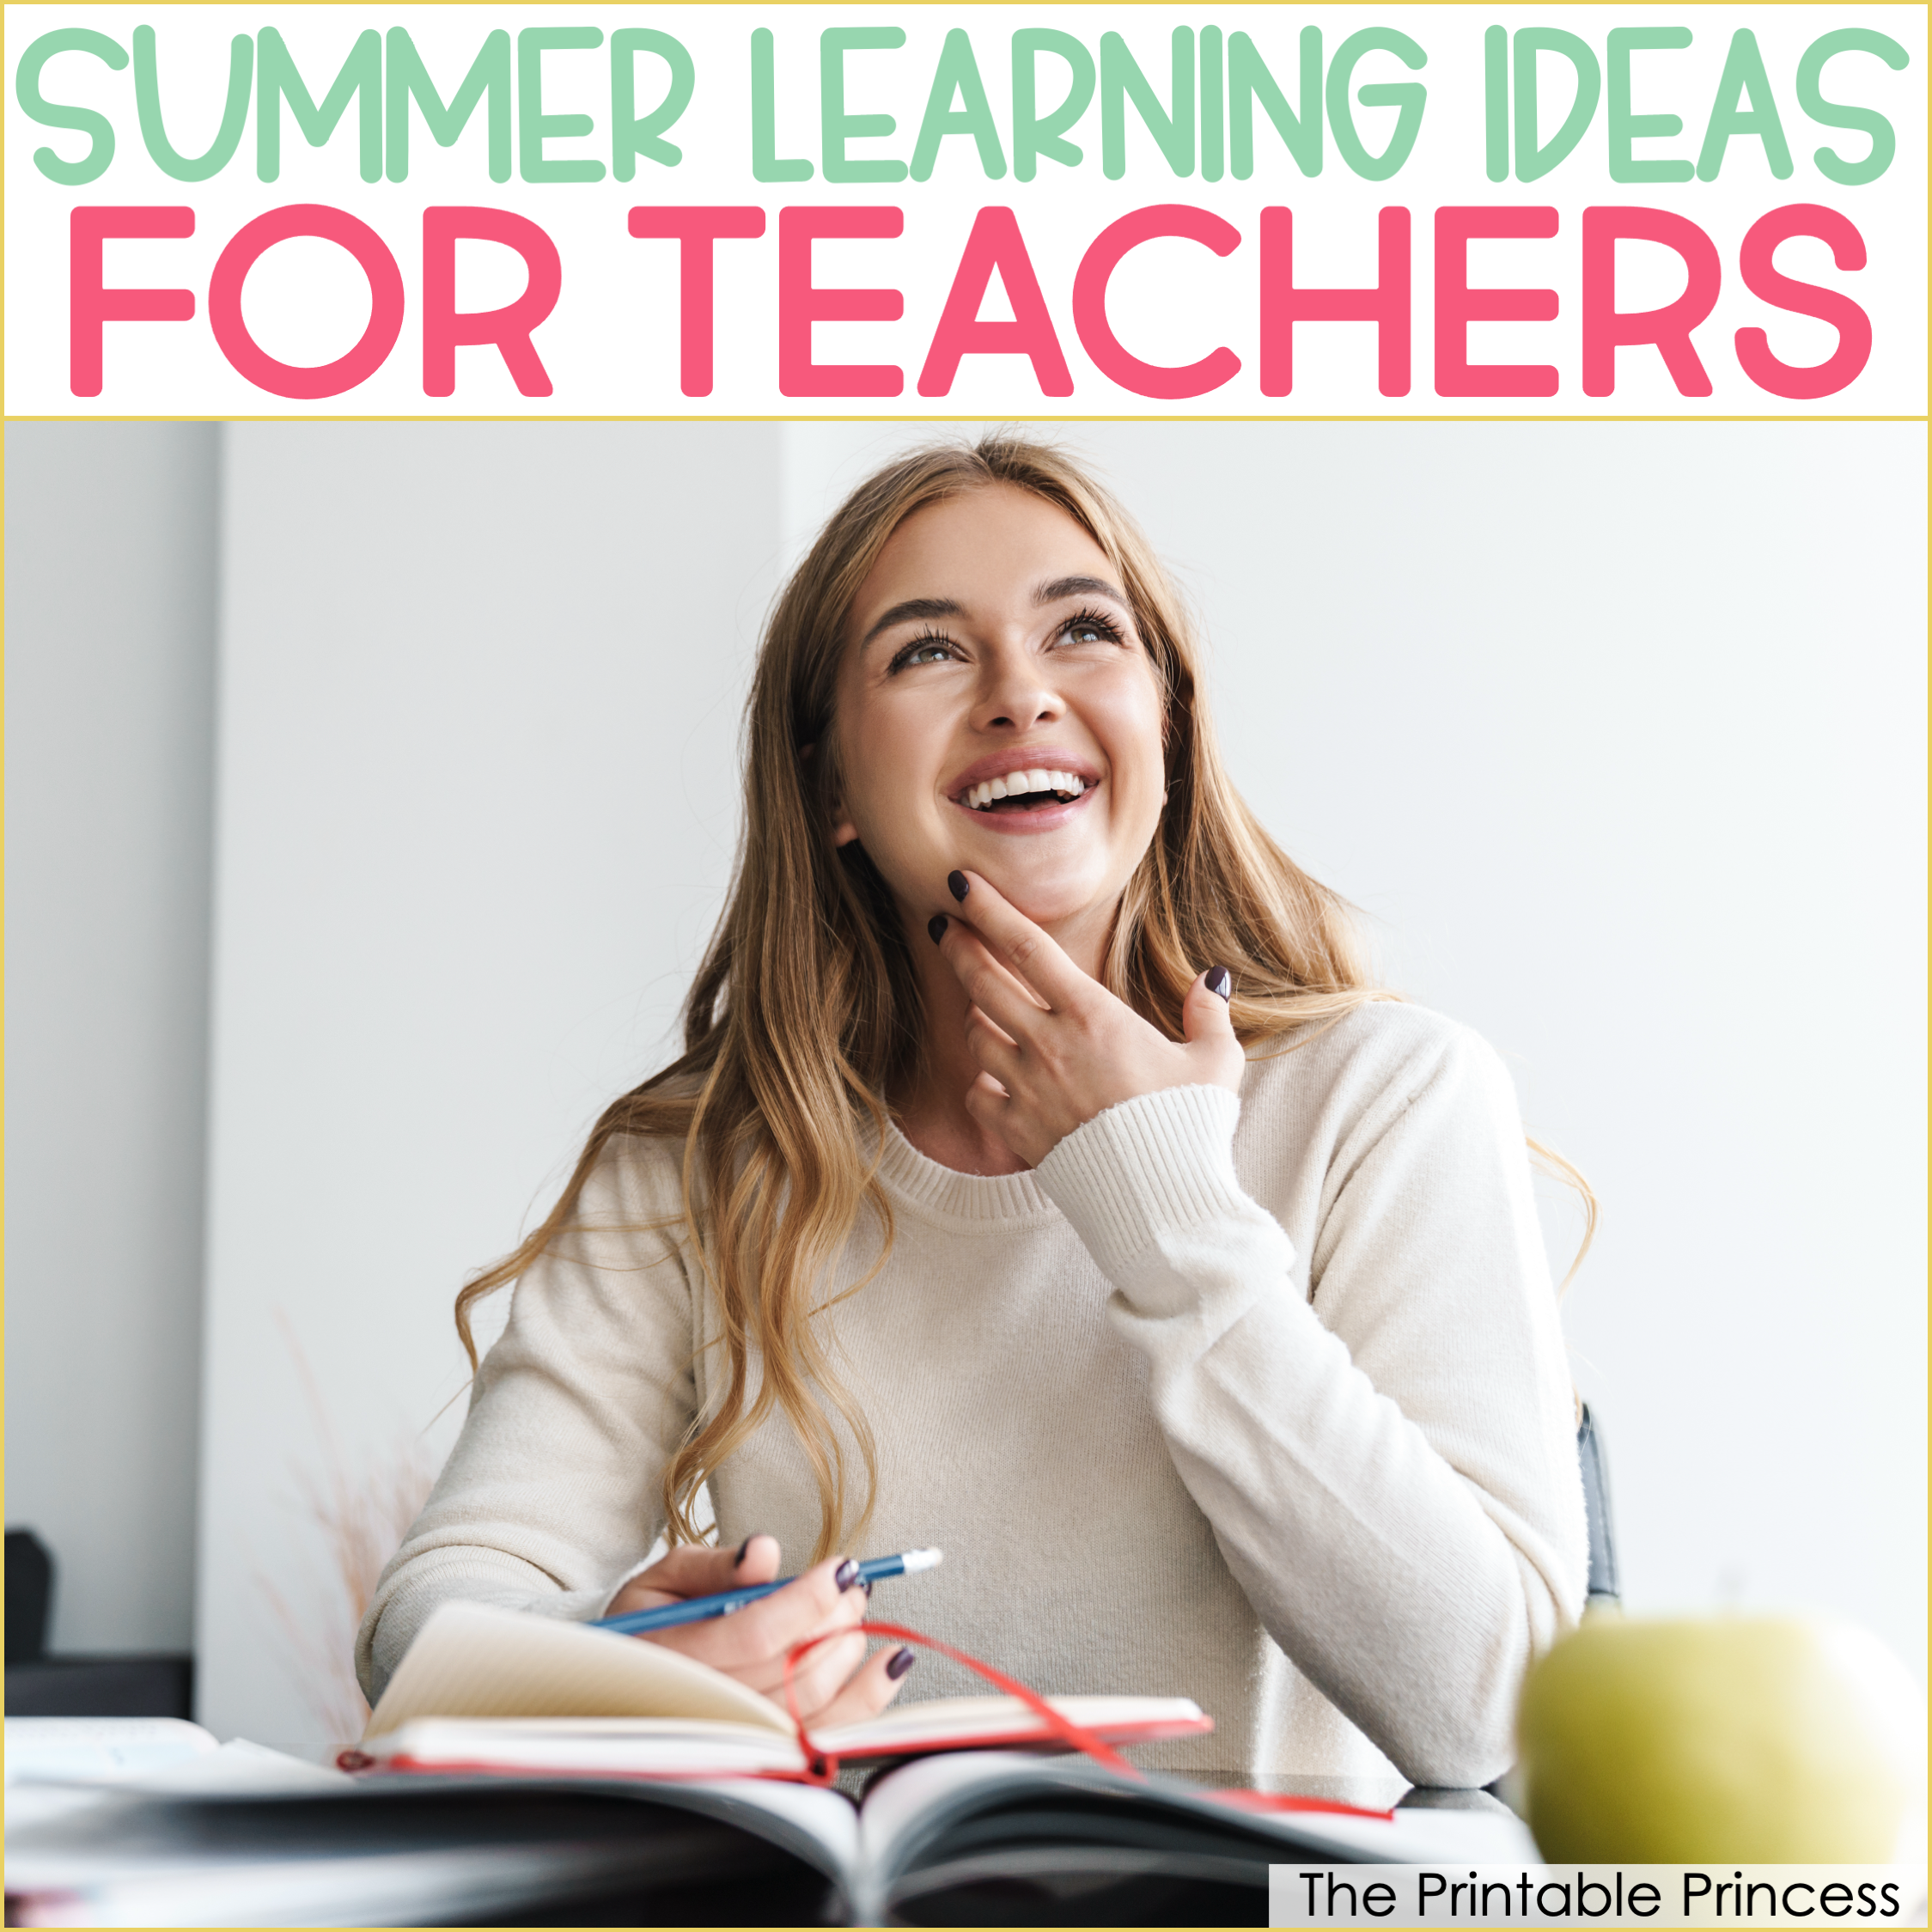 6 Ways to Get Professional Development in Over the Summer